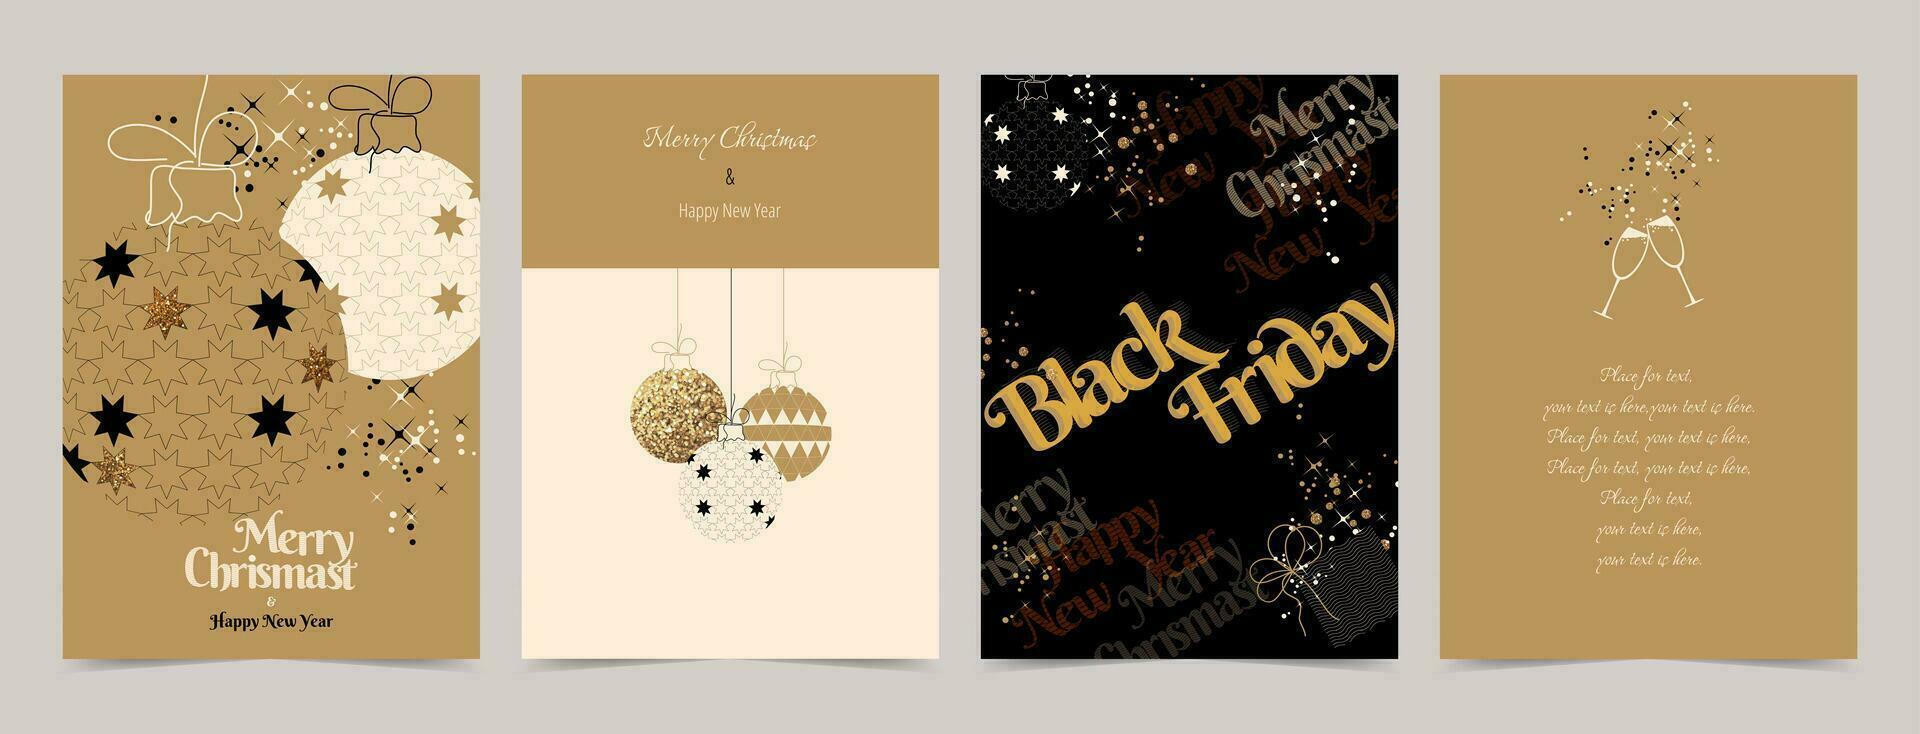 Set of cards with christmas theme and design for black friday sale. Christmas ornament, gifts, champagne glasses, place for text. vector